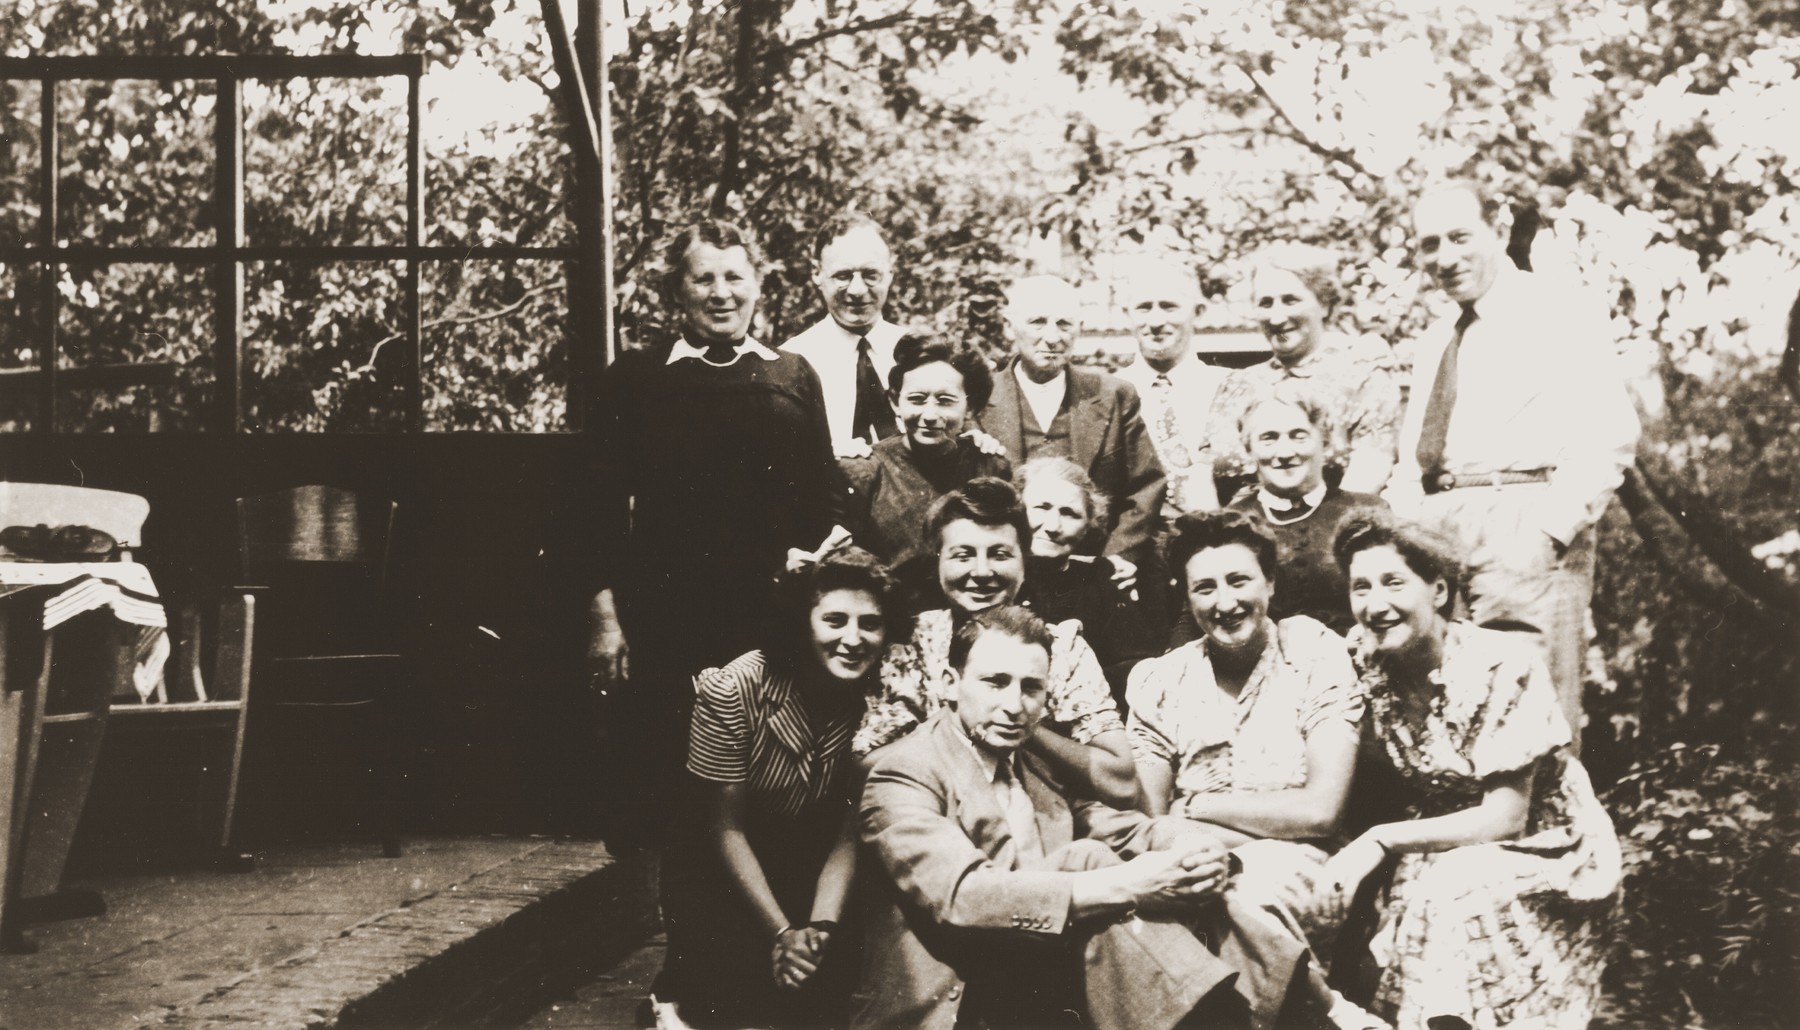 Group portrait of the extended Meijer family at the home of Hennie Meijer in Boekelo.

Pictured standing in the back row, from left to right are:  Na Meijer Berg, Albert Laufer, Joseph Meijer, Johny Meijer, Hennie Meijer, and Willem Meijer.  Seated in the third row from the front are Nannie Laufer (in front of Albert), unknown, and Lina Neuman Meijer (in front of Hennie).  Seated in the second row from left to right are: Sarie Berg, Renee (Sara) Meyer, Bep Meijer, and Gerta Sajet.  Seated in front is Richard Meijer.